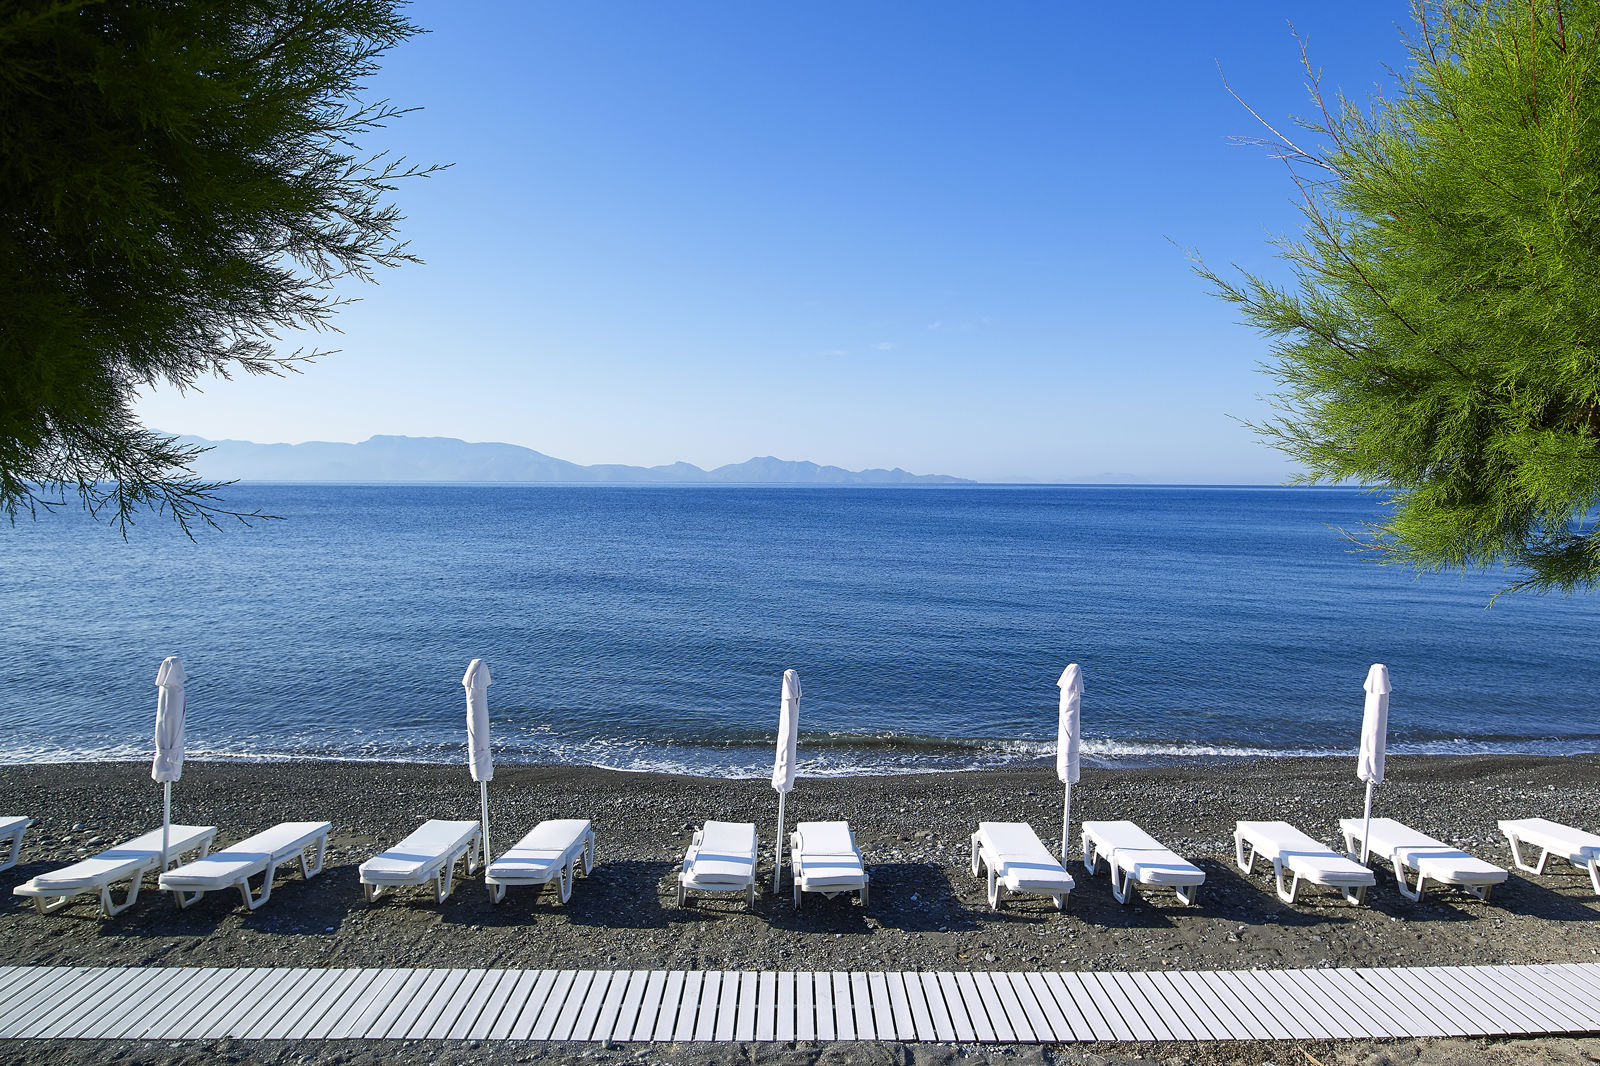 Fly&Go Dimitra Beach Hotel&Suites